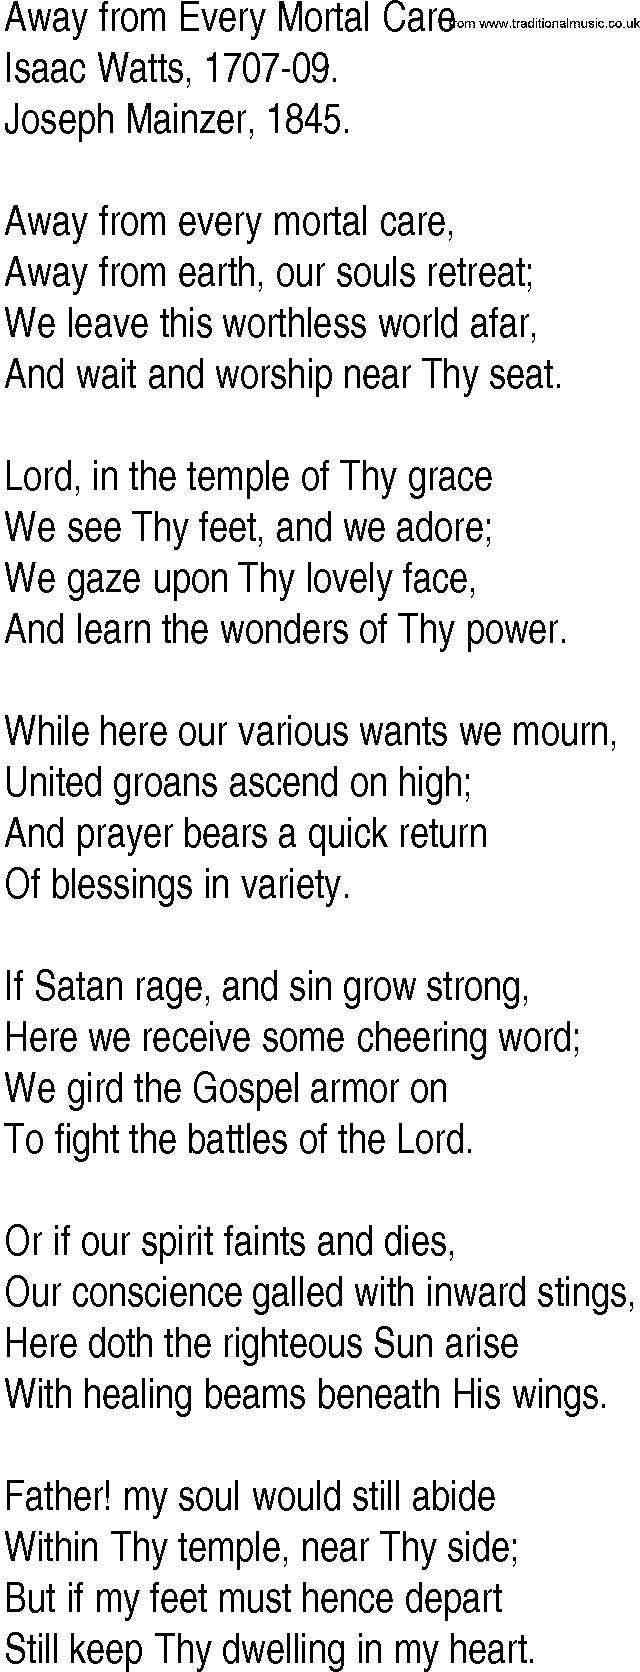 Hymn and Gospel Song: Away from Every Mortal Care by Isaac Watts lyrics